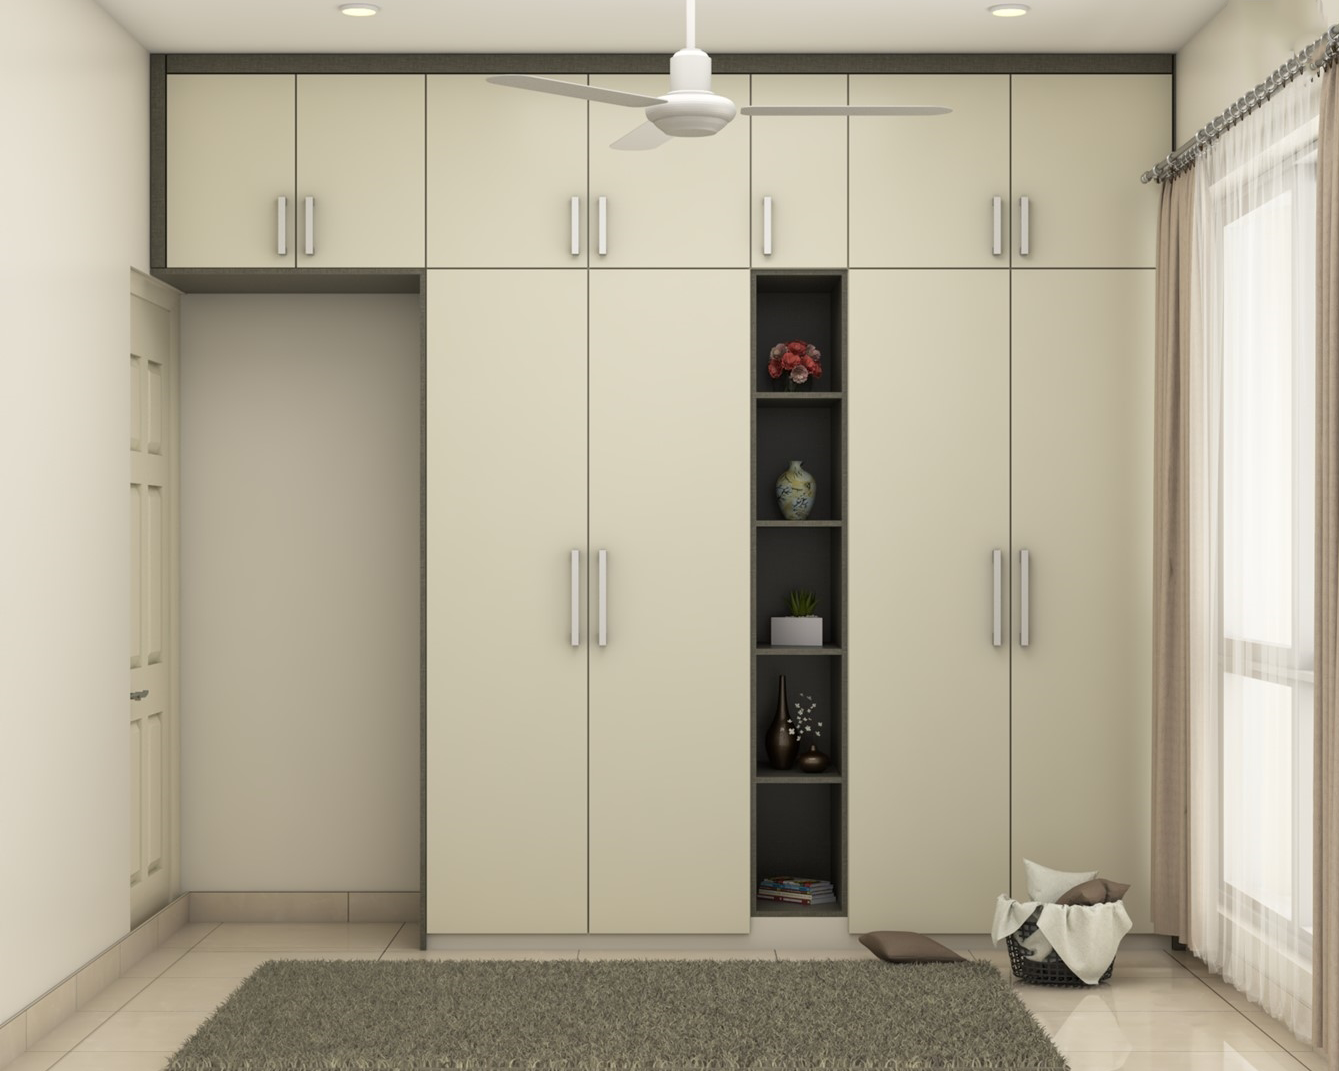 Modern Convenient Wardrobe Design With Open Compartments